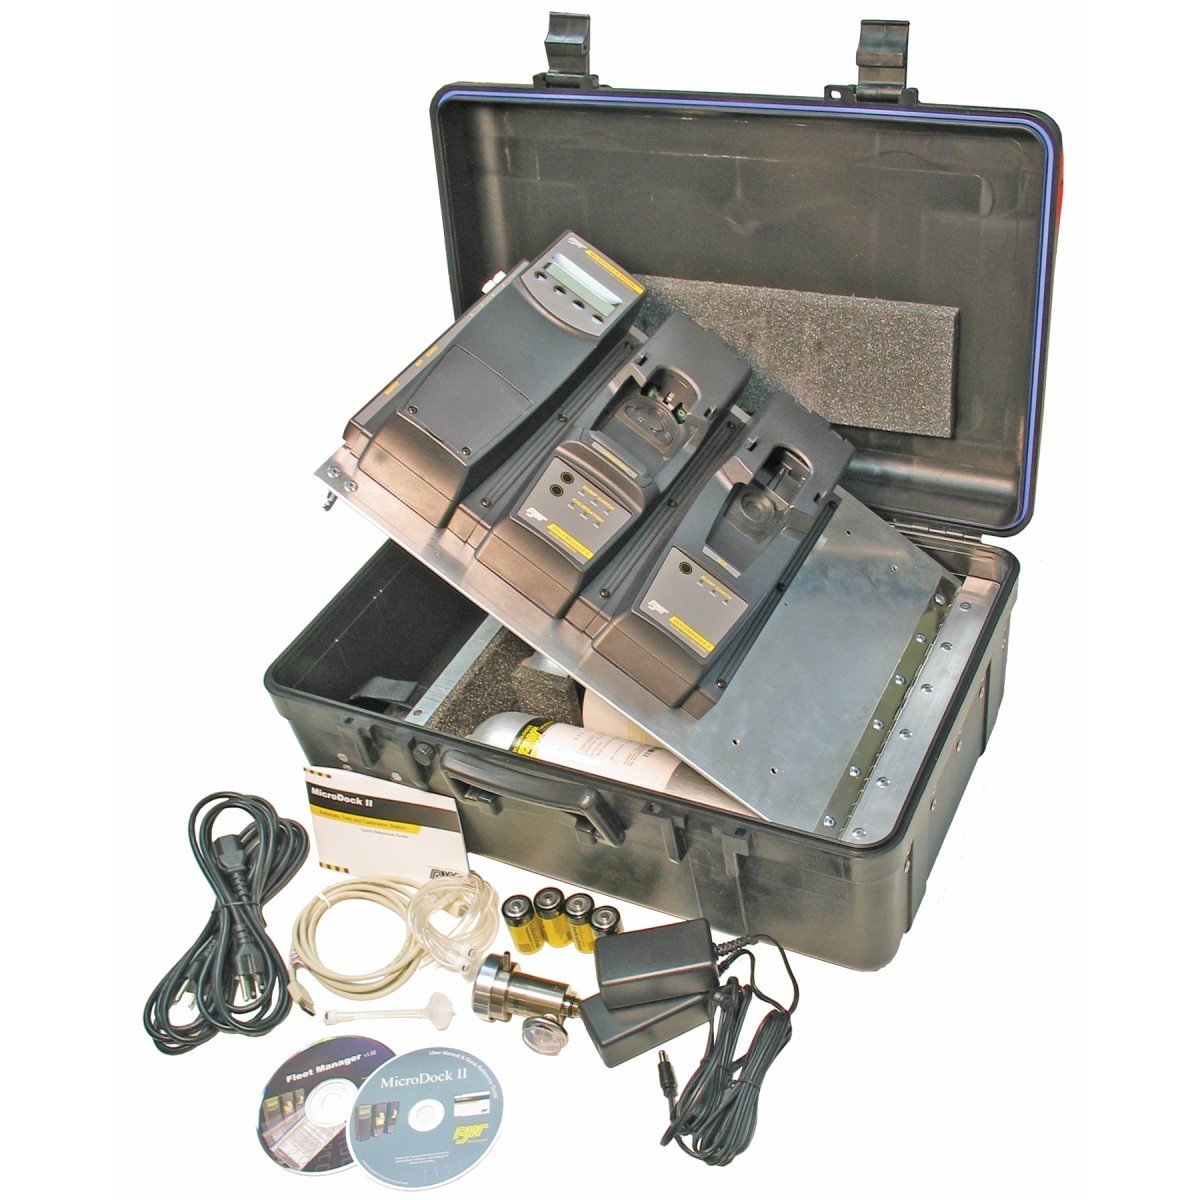 Honeywell Heavy Duty Carrying Case For MicroDock II Calibration Station With Wheels